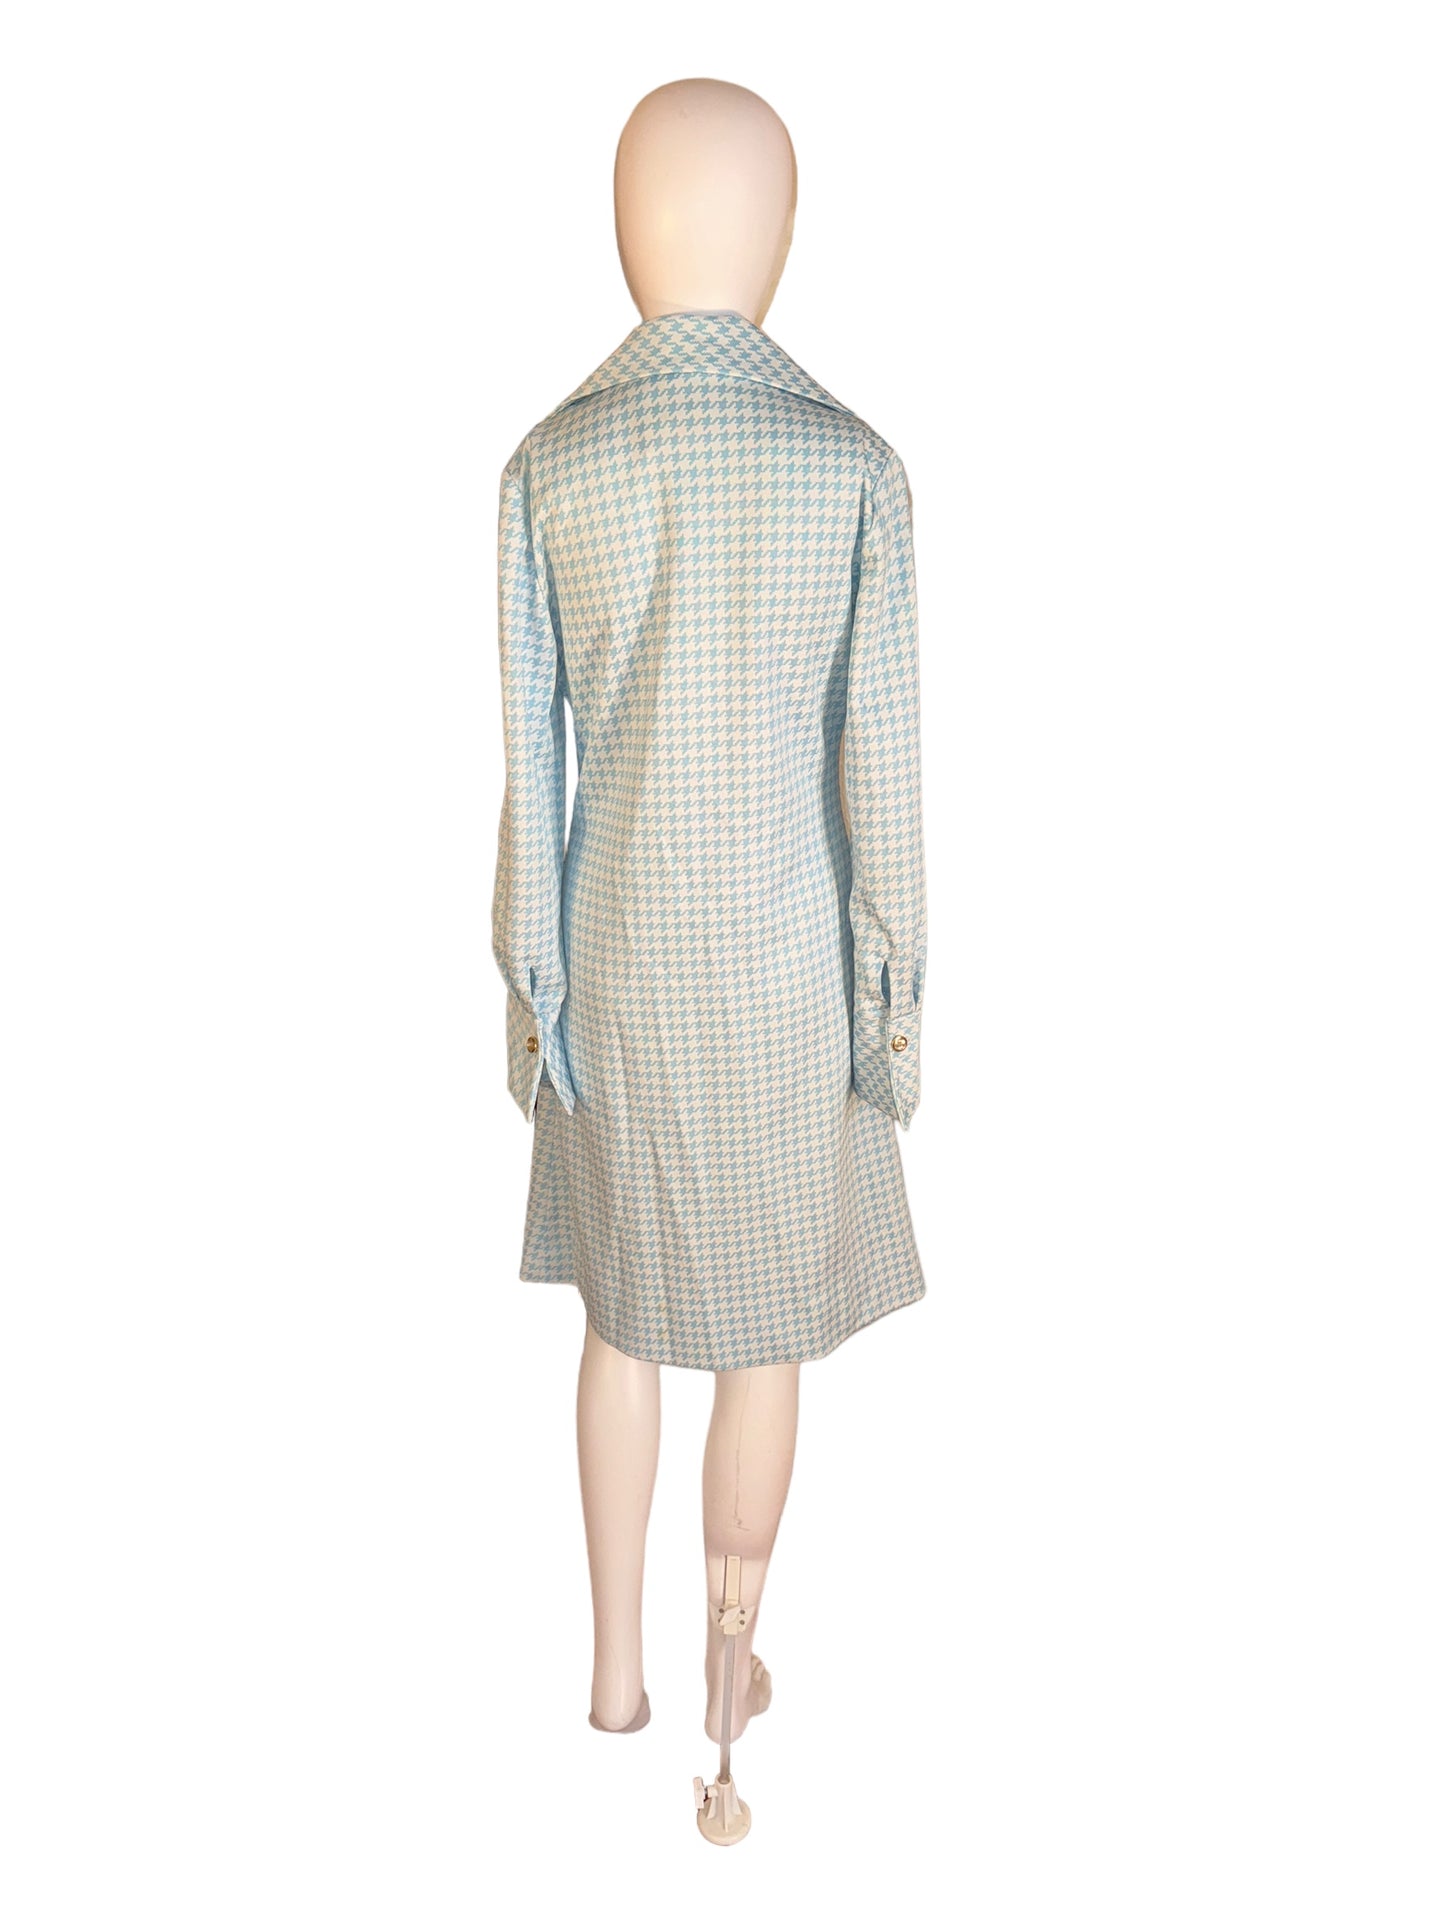 Vintage Wide Lapel Gingham Dress by David Crystal 1970s Flared Cuff